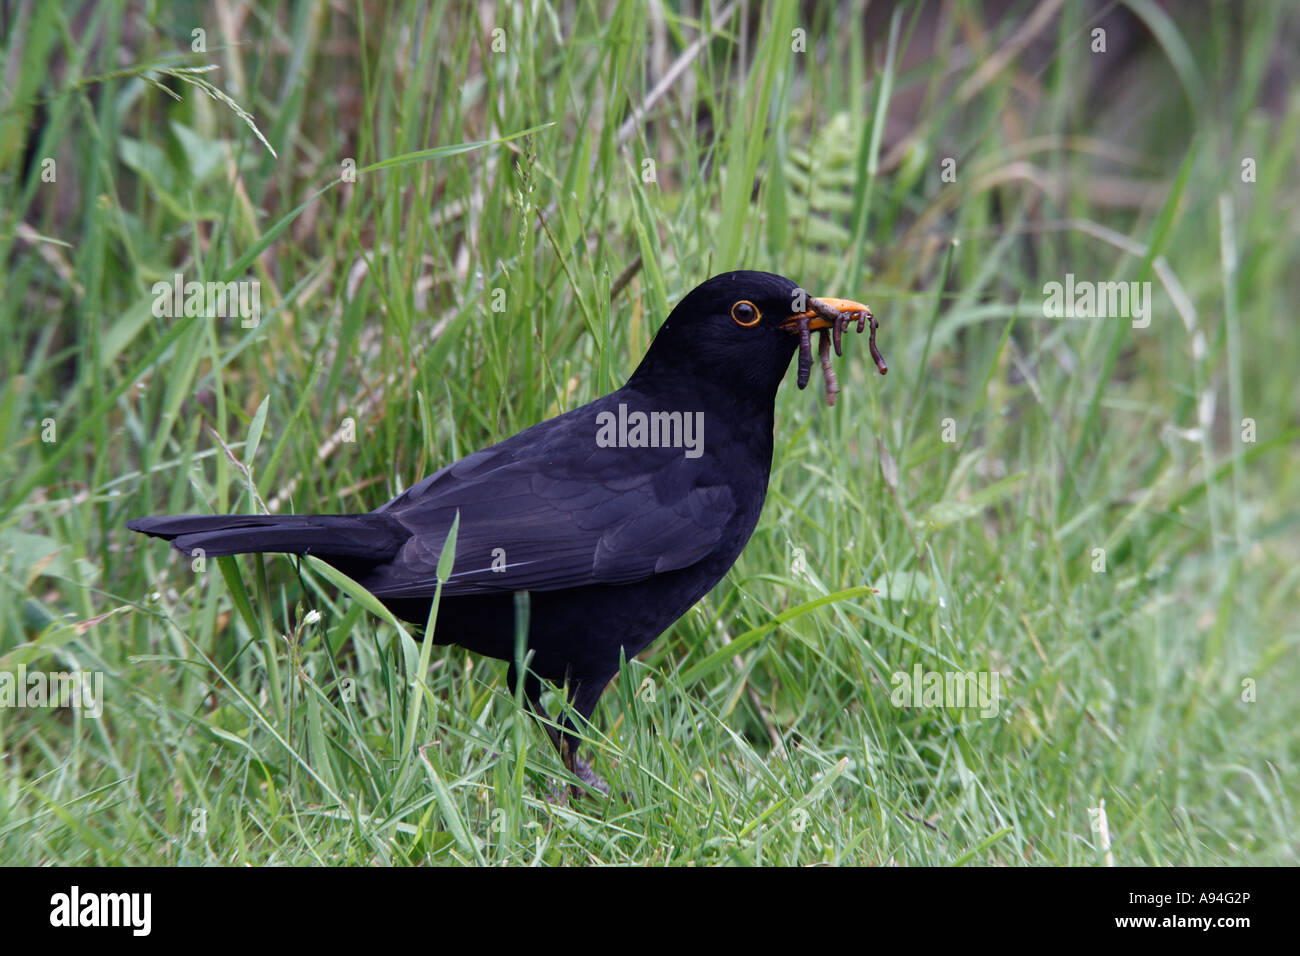 Blackbird Turdus merula hunting for food with beak full of worms with nice grassy background potton bedfordshire Stock Photo